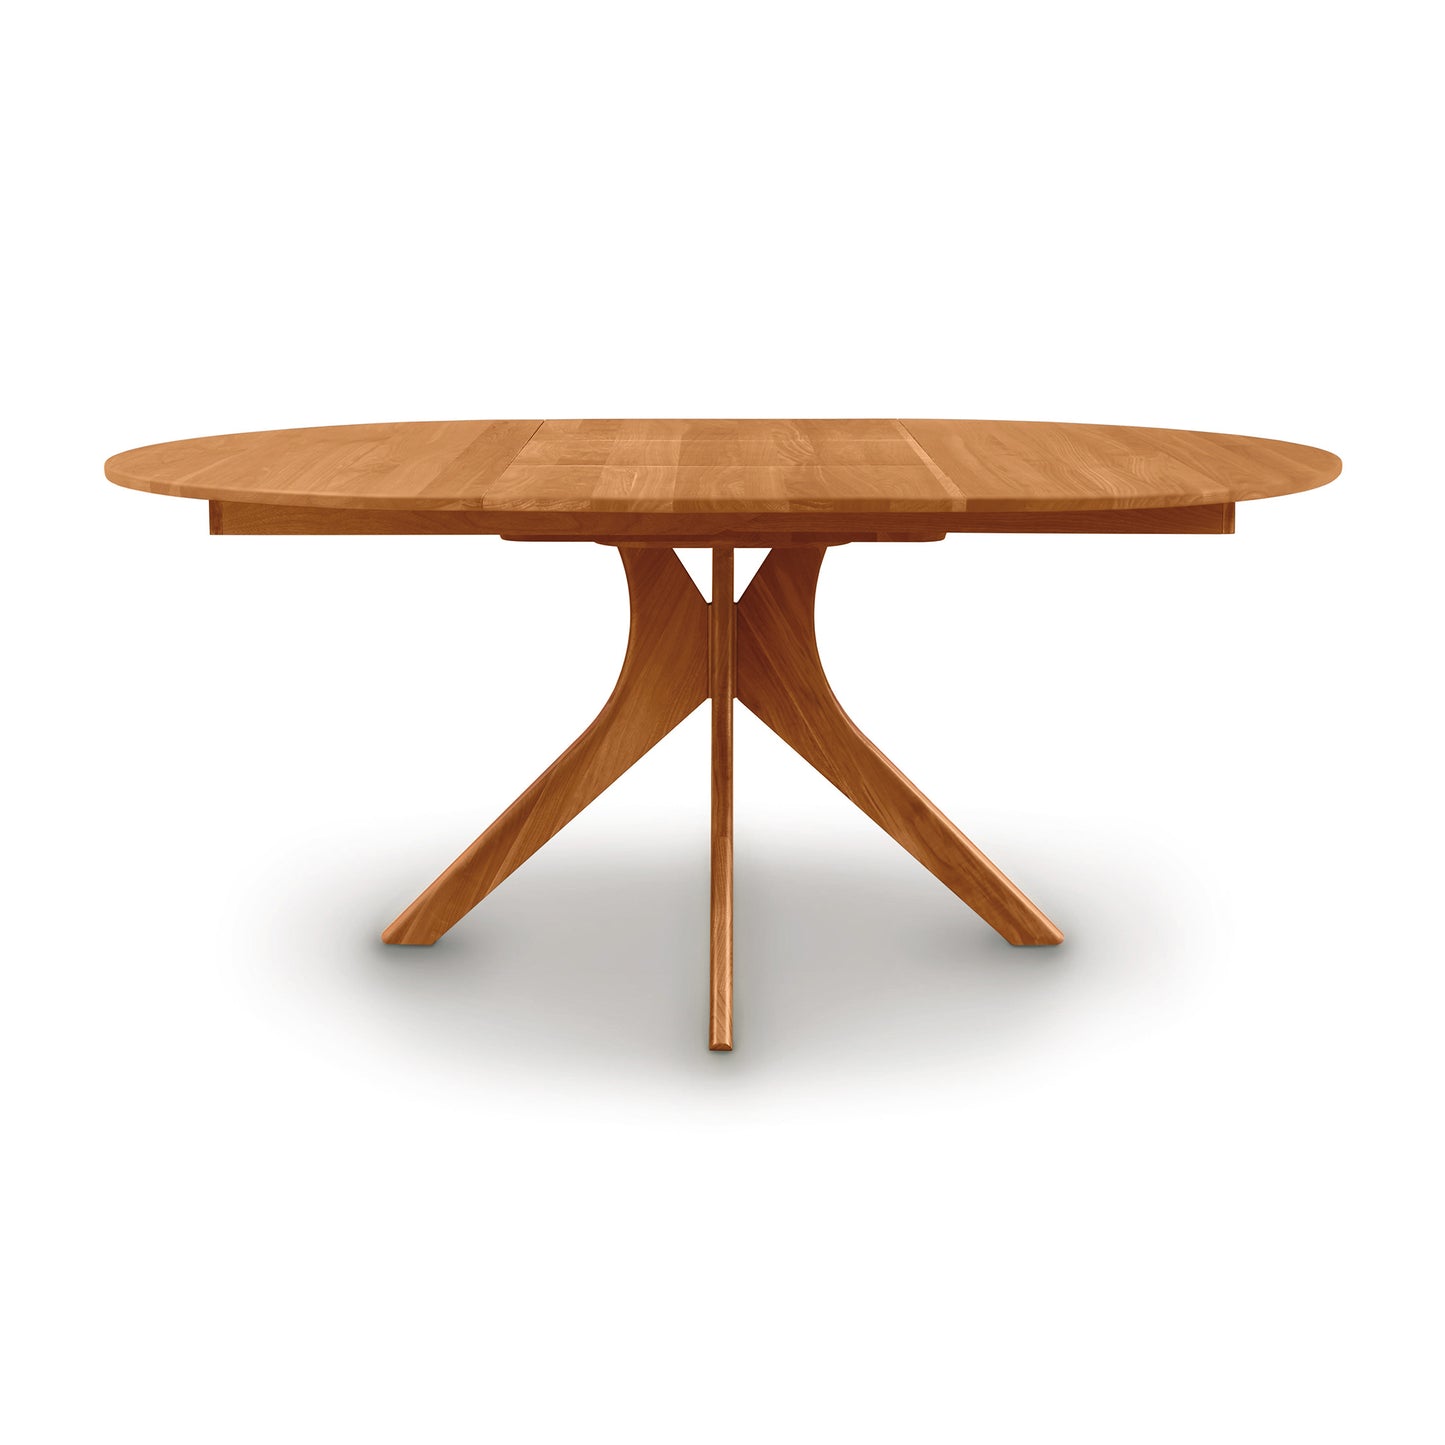 A solid wood Audrey Round Extension Dining Table with a pedestal base and extension, isolated on a white background by Copeland Furniture.